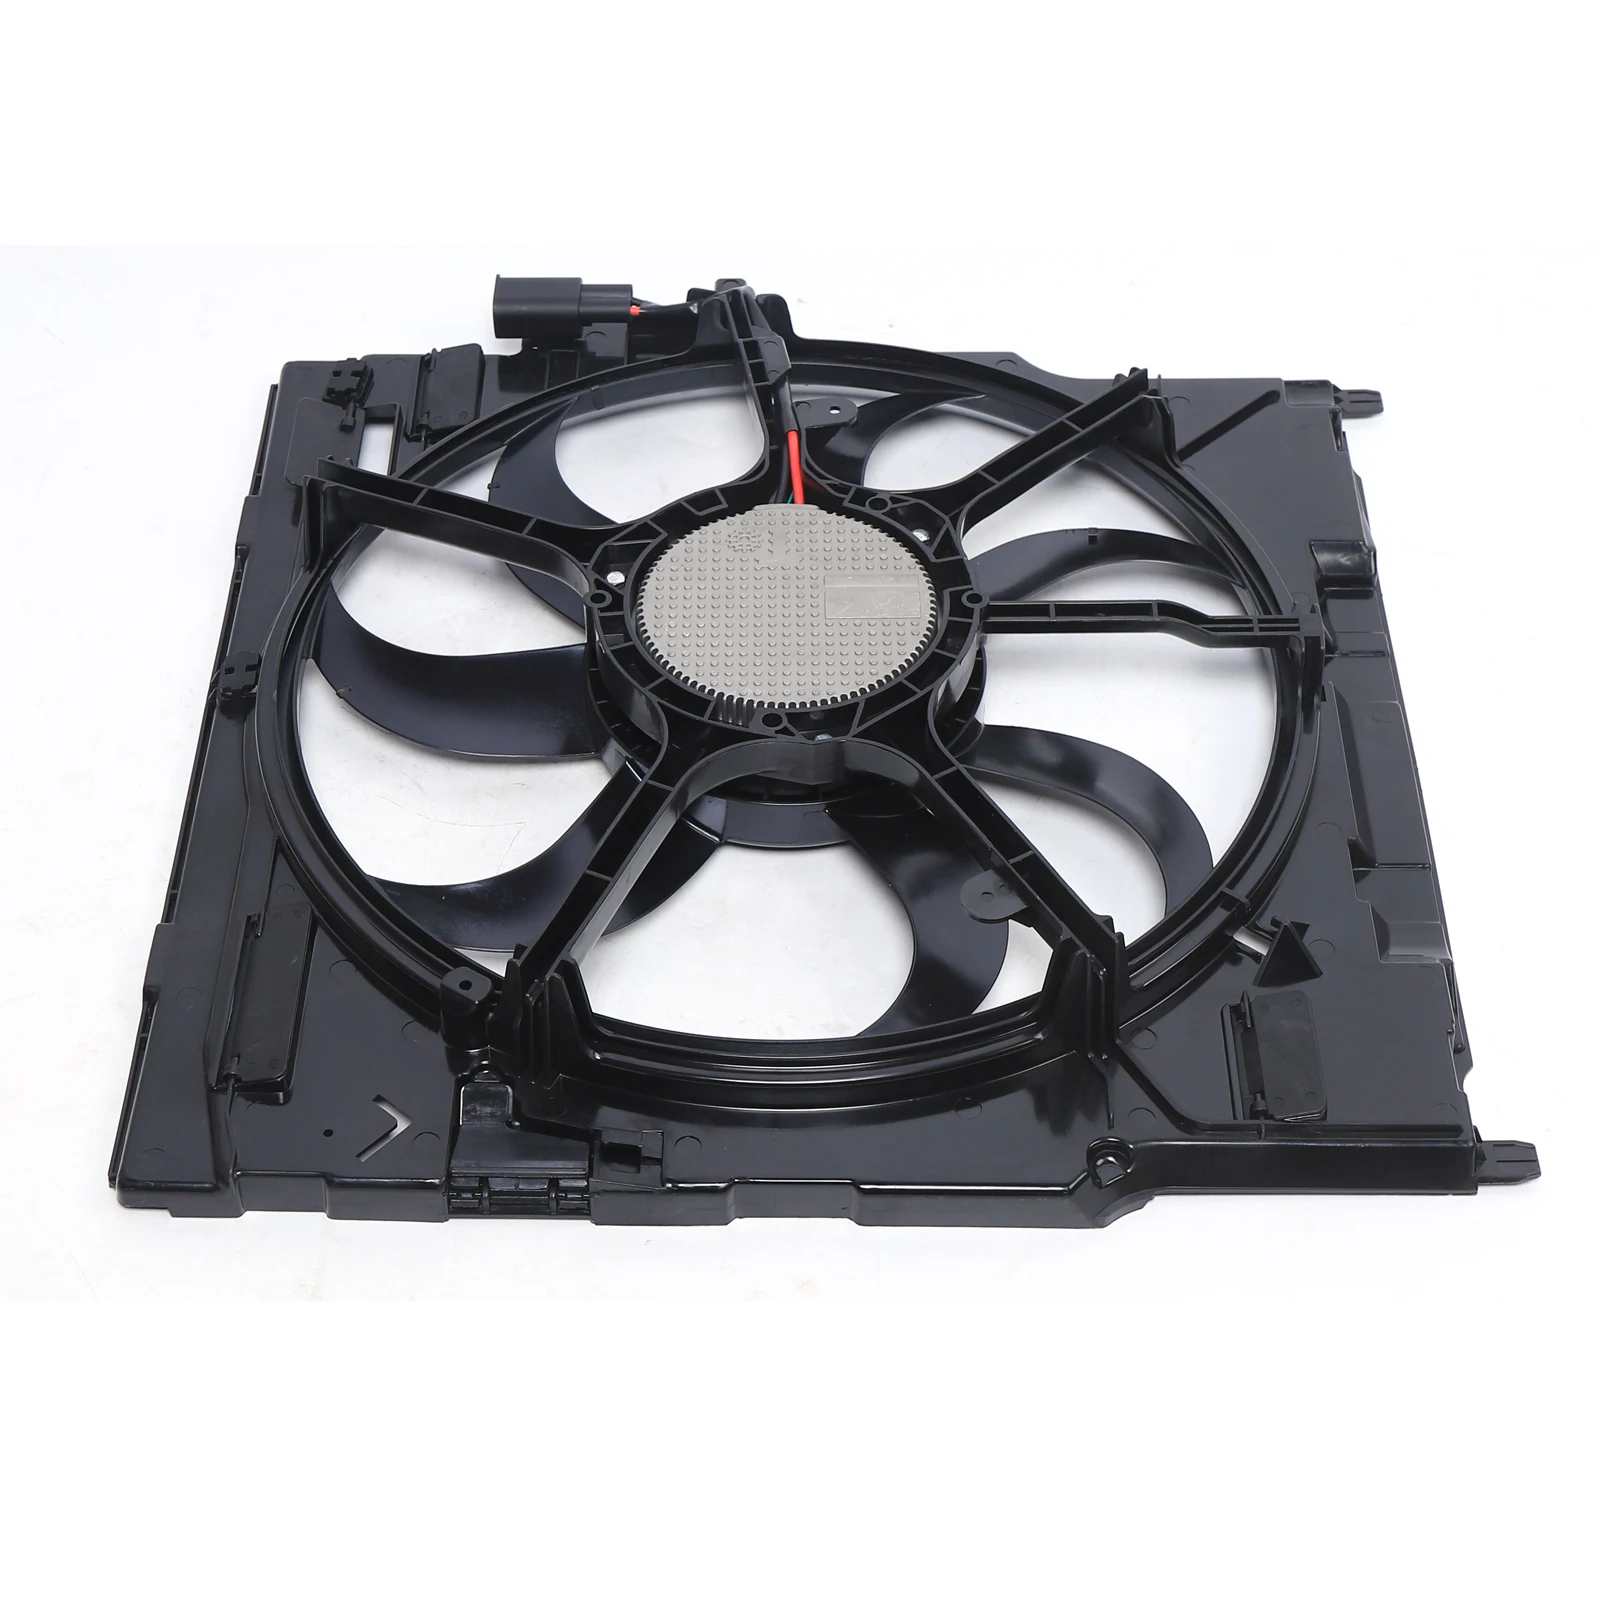 

Radiator Engine Cooling Fan Assembly For BMW X5 3.0si Sport Utility 4-Door 2007 2008 2009 2010 High Speed Motor Car Part